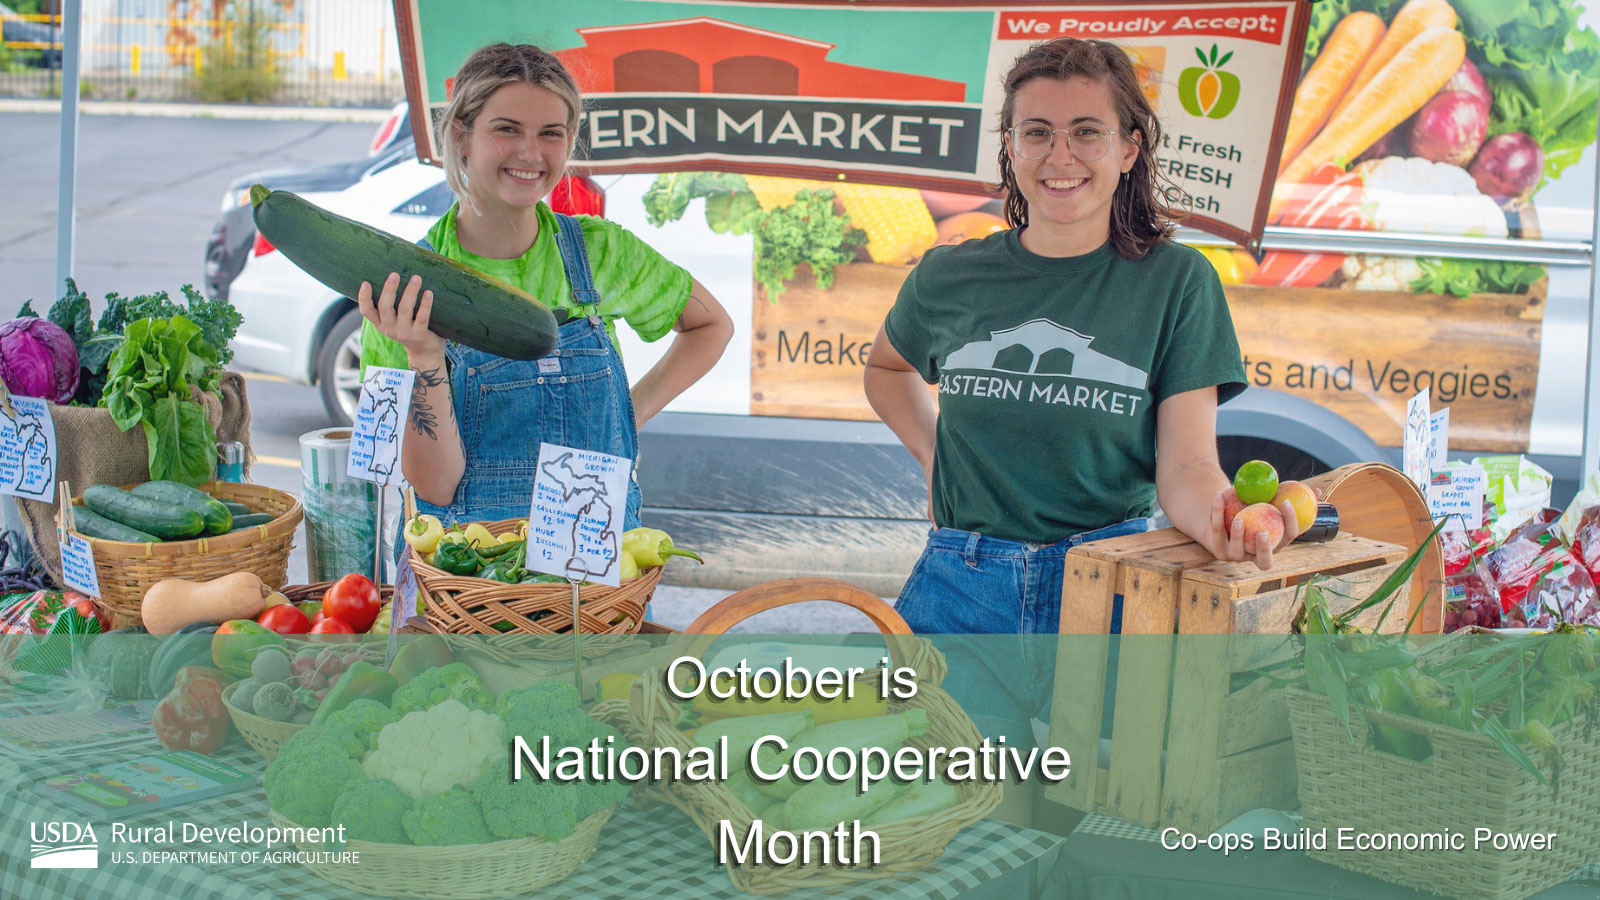 A woman smiling holding a cucumber and another woman smiling at the market with October is National Cooperative Month text overlay